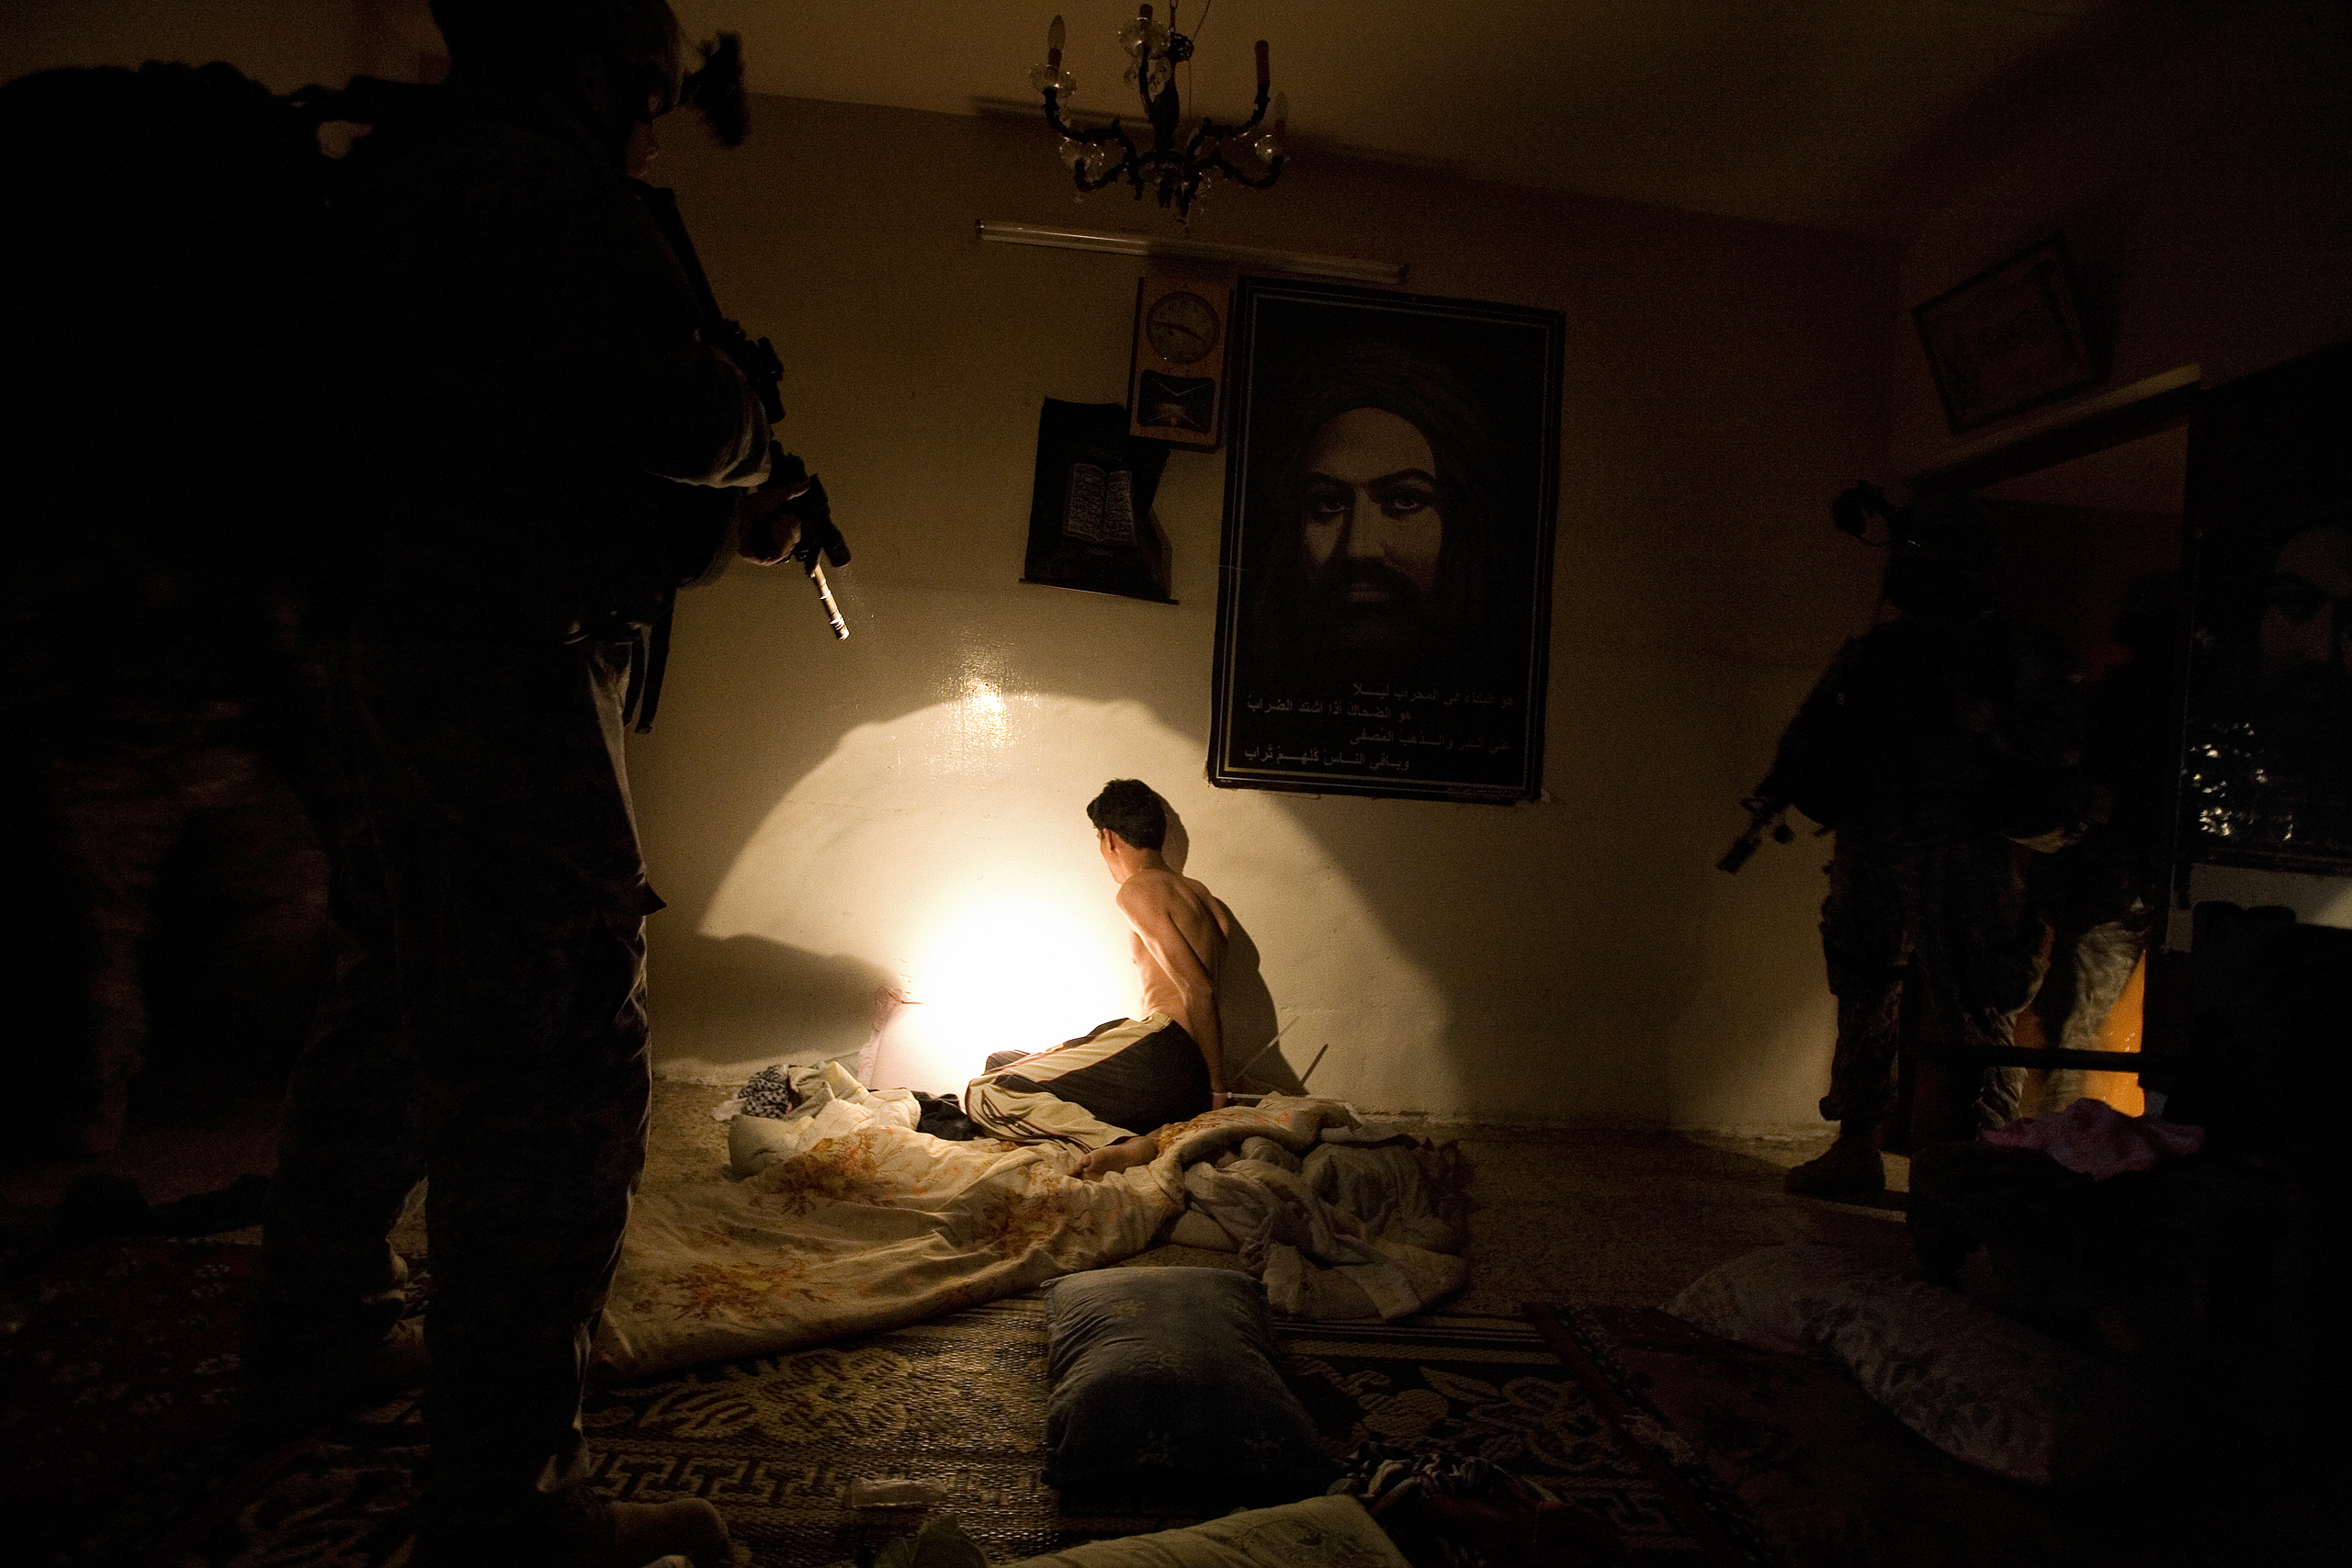 U.S. soldiers arrest a group of suspected Madhi Army members, including this man, in the Shi'te district of Shaab, Baghdad, Iraq, May 28, 2007. The men were accused of kidnapping and killing a Sunni man.